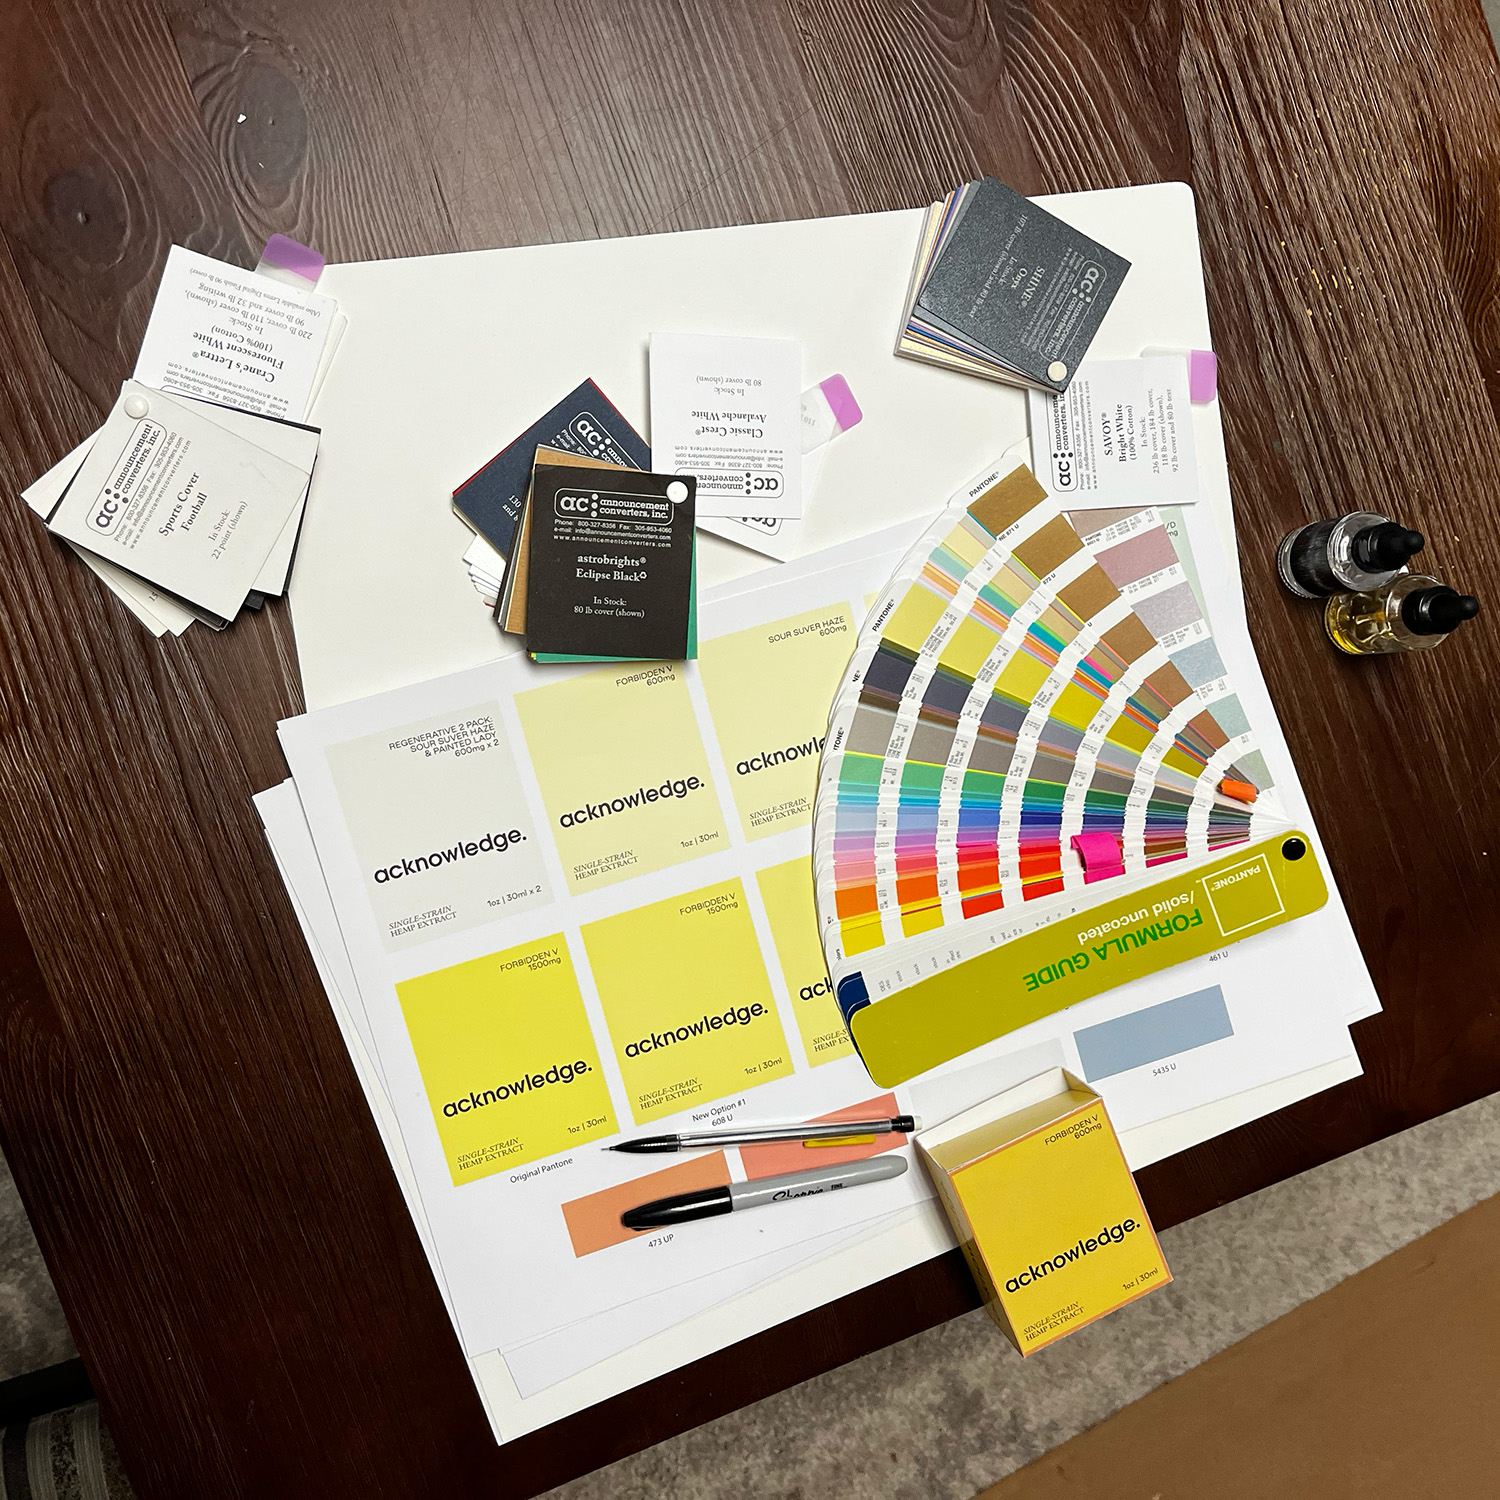 A somewhat messy table featuring many different types of paper, a Pantone color matching book, and a few rough prototypes of packaging.